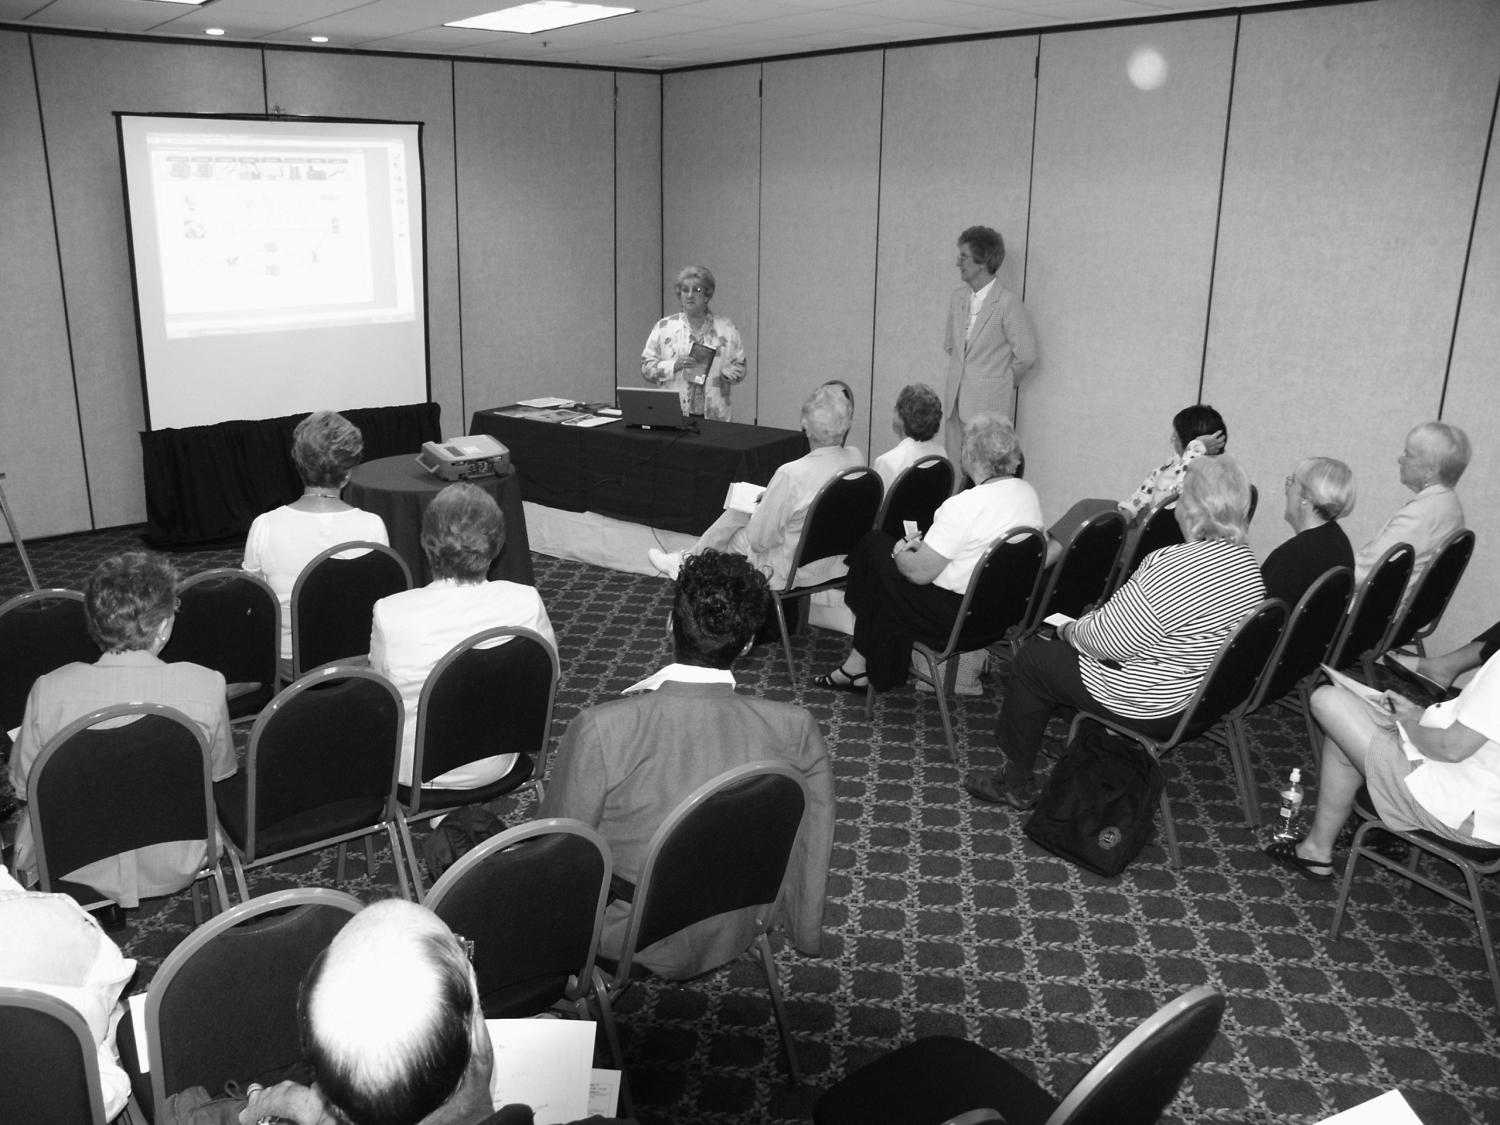 [Alrene Hall and Jane Hope workshop], Photograph of Alrene Hall and Jane Hope giving a workshop titled, "Concourse and EZCat: An Introduction" at the the 40th anniversary Church and Synagogue Library Association conference held at the Inn at Valley Forge in King of Prussia, Pennsylvania., 